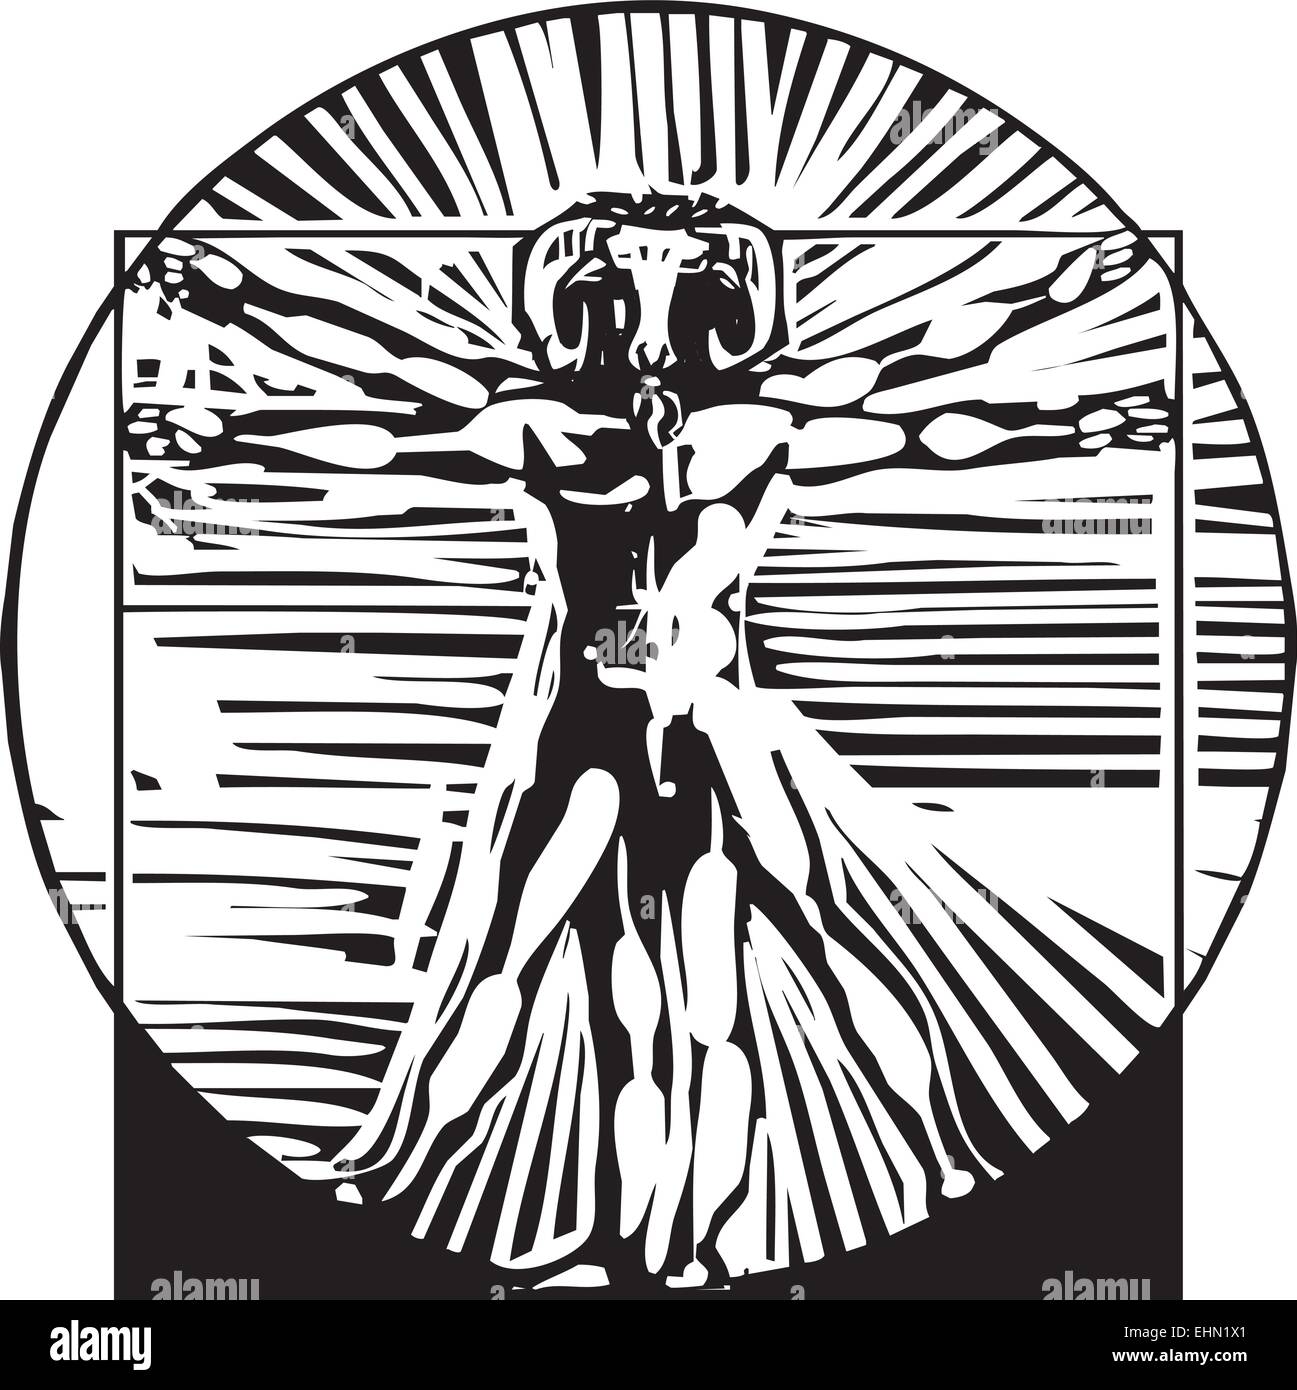 woodcut style depiction based on Leonardo Da Vinci's Proportions of Man but with a goats head. Stock Vector